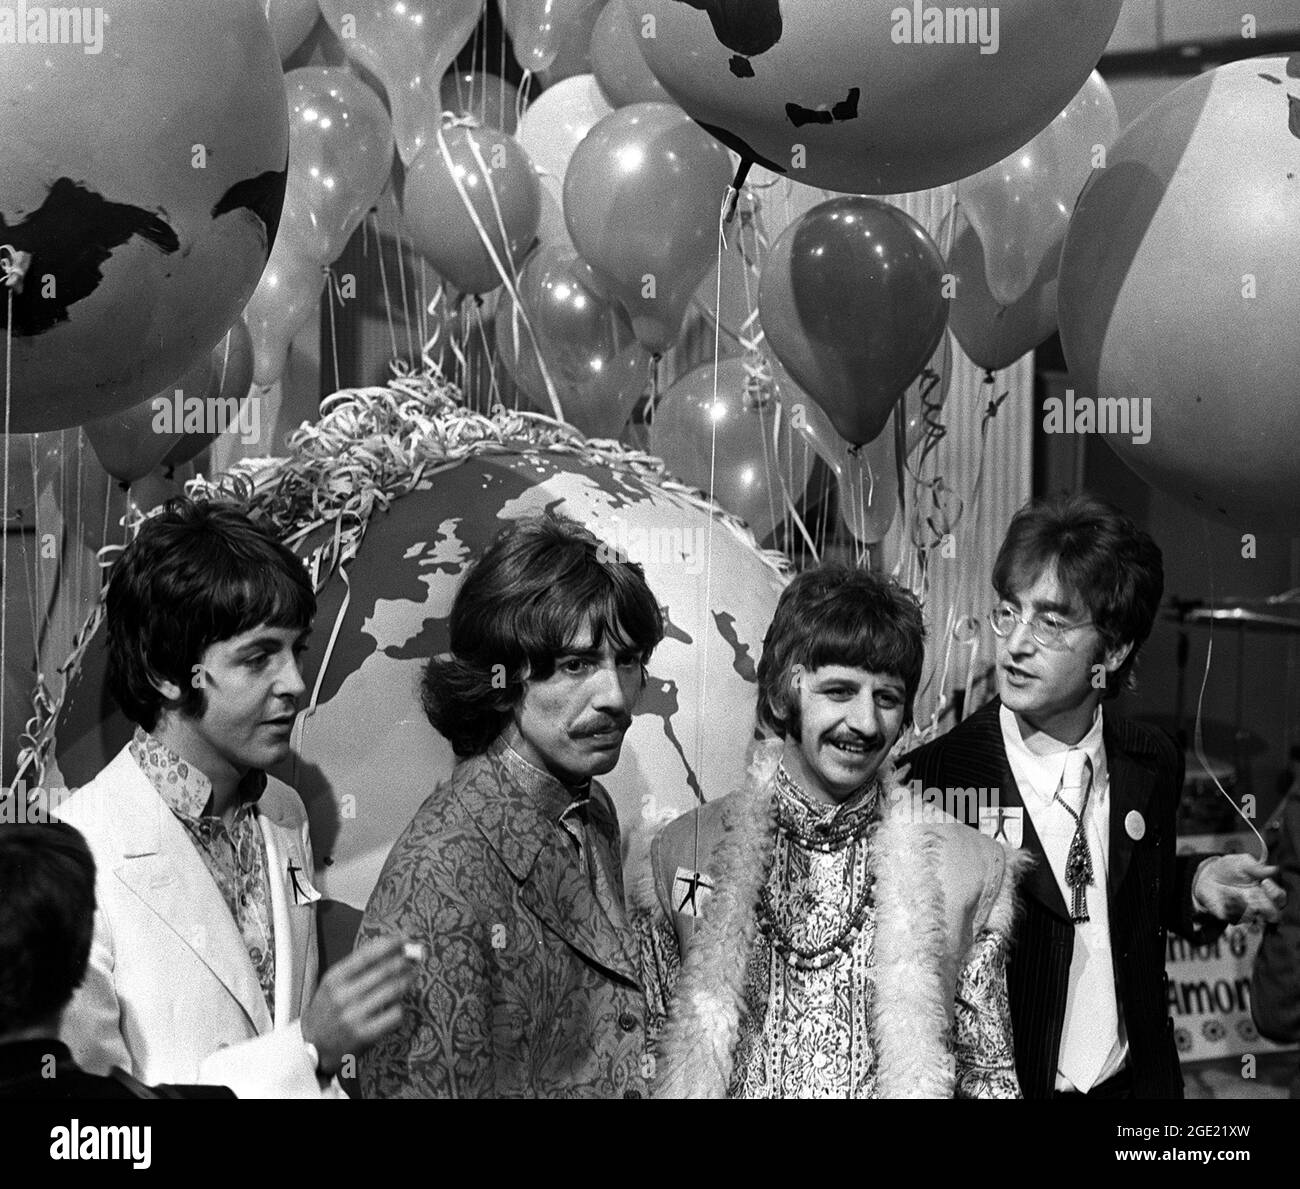 File photo dated 24/06/67 of the Beatles (L-R) Paul McCartney, George Harrison, Ringo Starr and John Lennon during rehearsals for their appearance in the international television programme 'Our World' at the EMI Studios, St. John's Wood, London. A classical statue which featured in a historic performance by the Beatles is set to go on sale at auction in Liverpool on Saturday August 28. Issue date: Monday August 16, 2021. Stock Photo